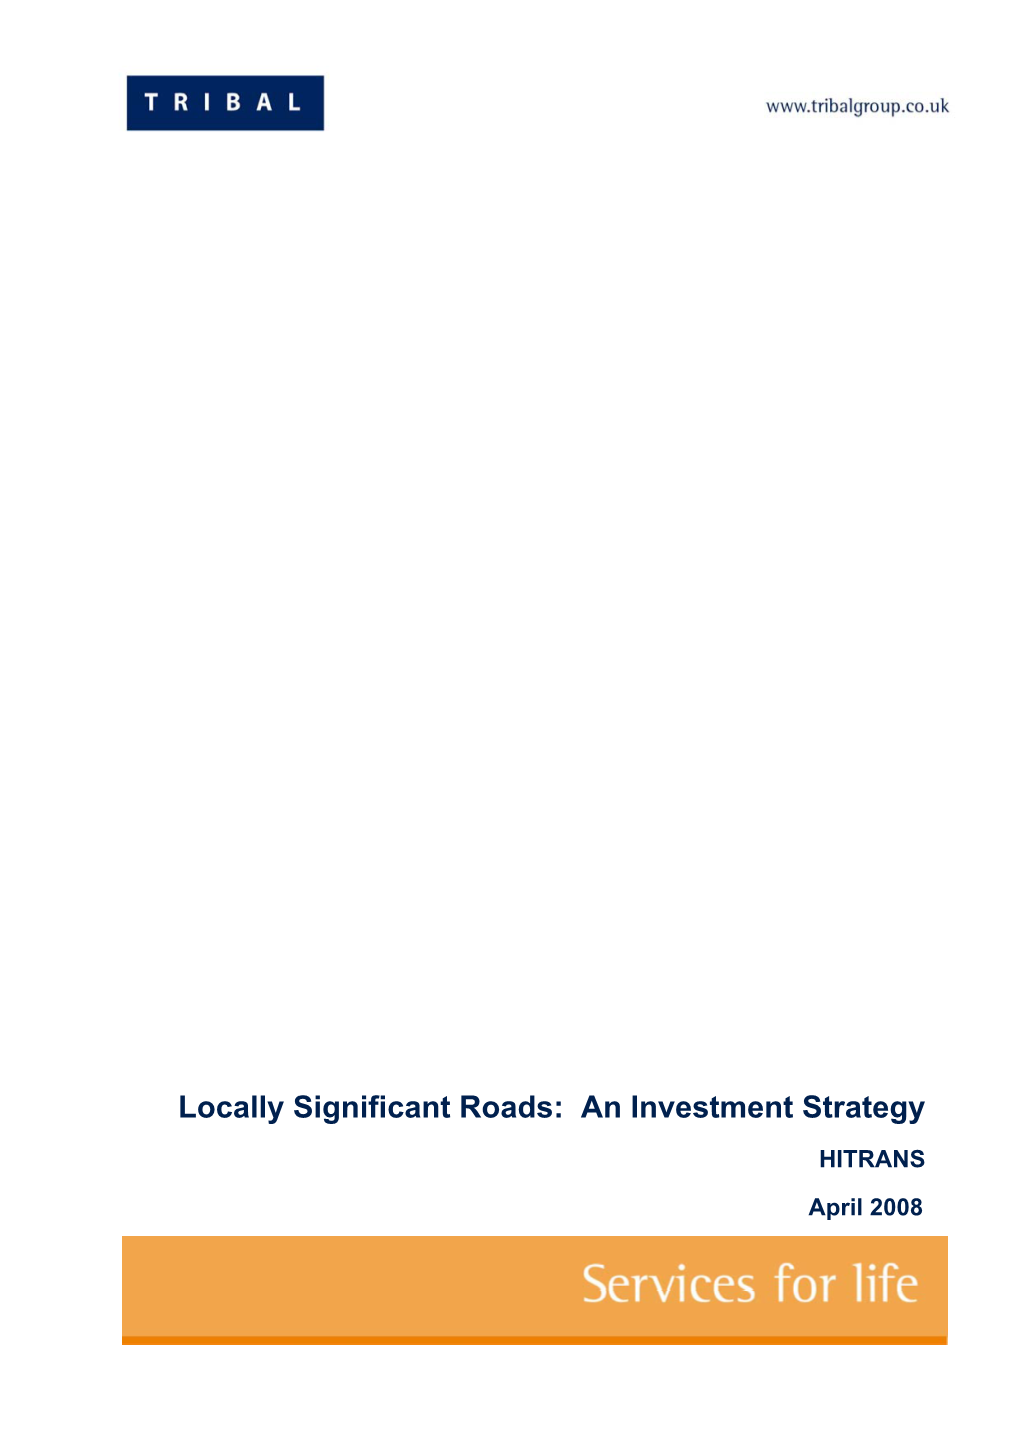 Locally Significant Roads: an Investment Strategy